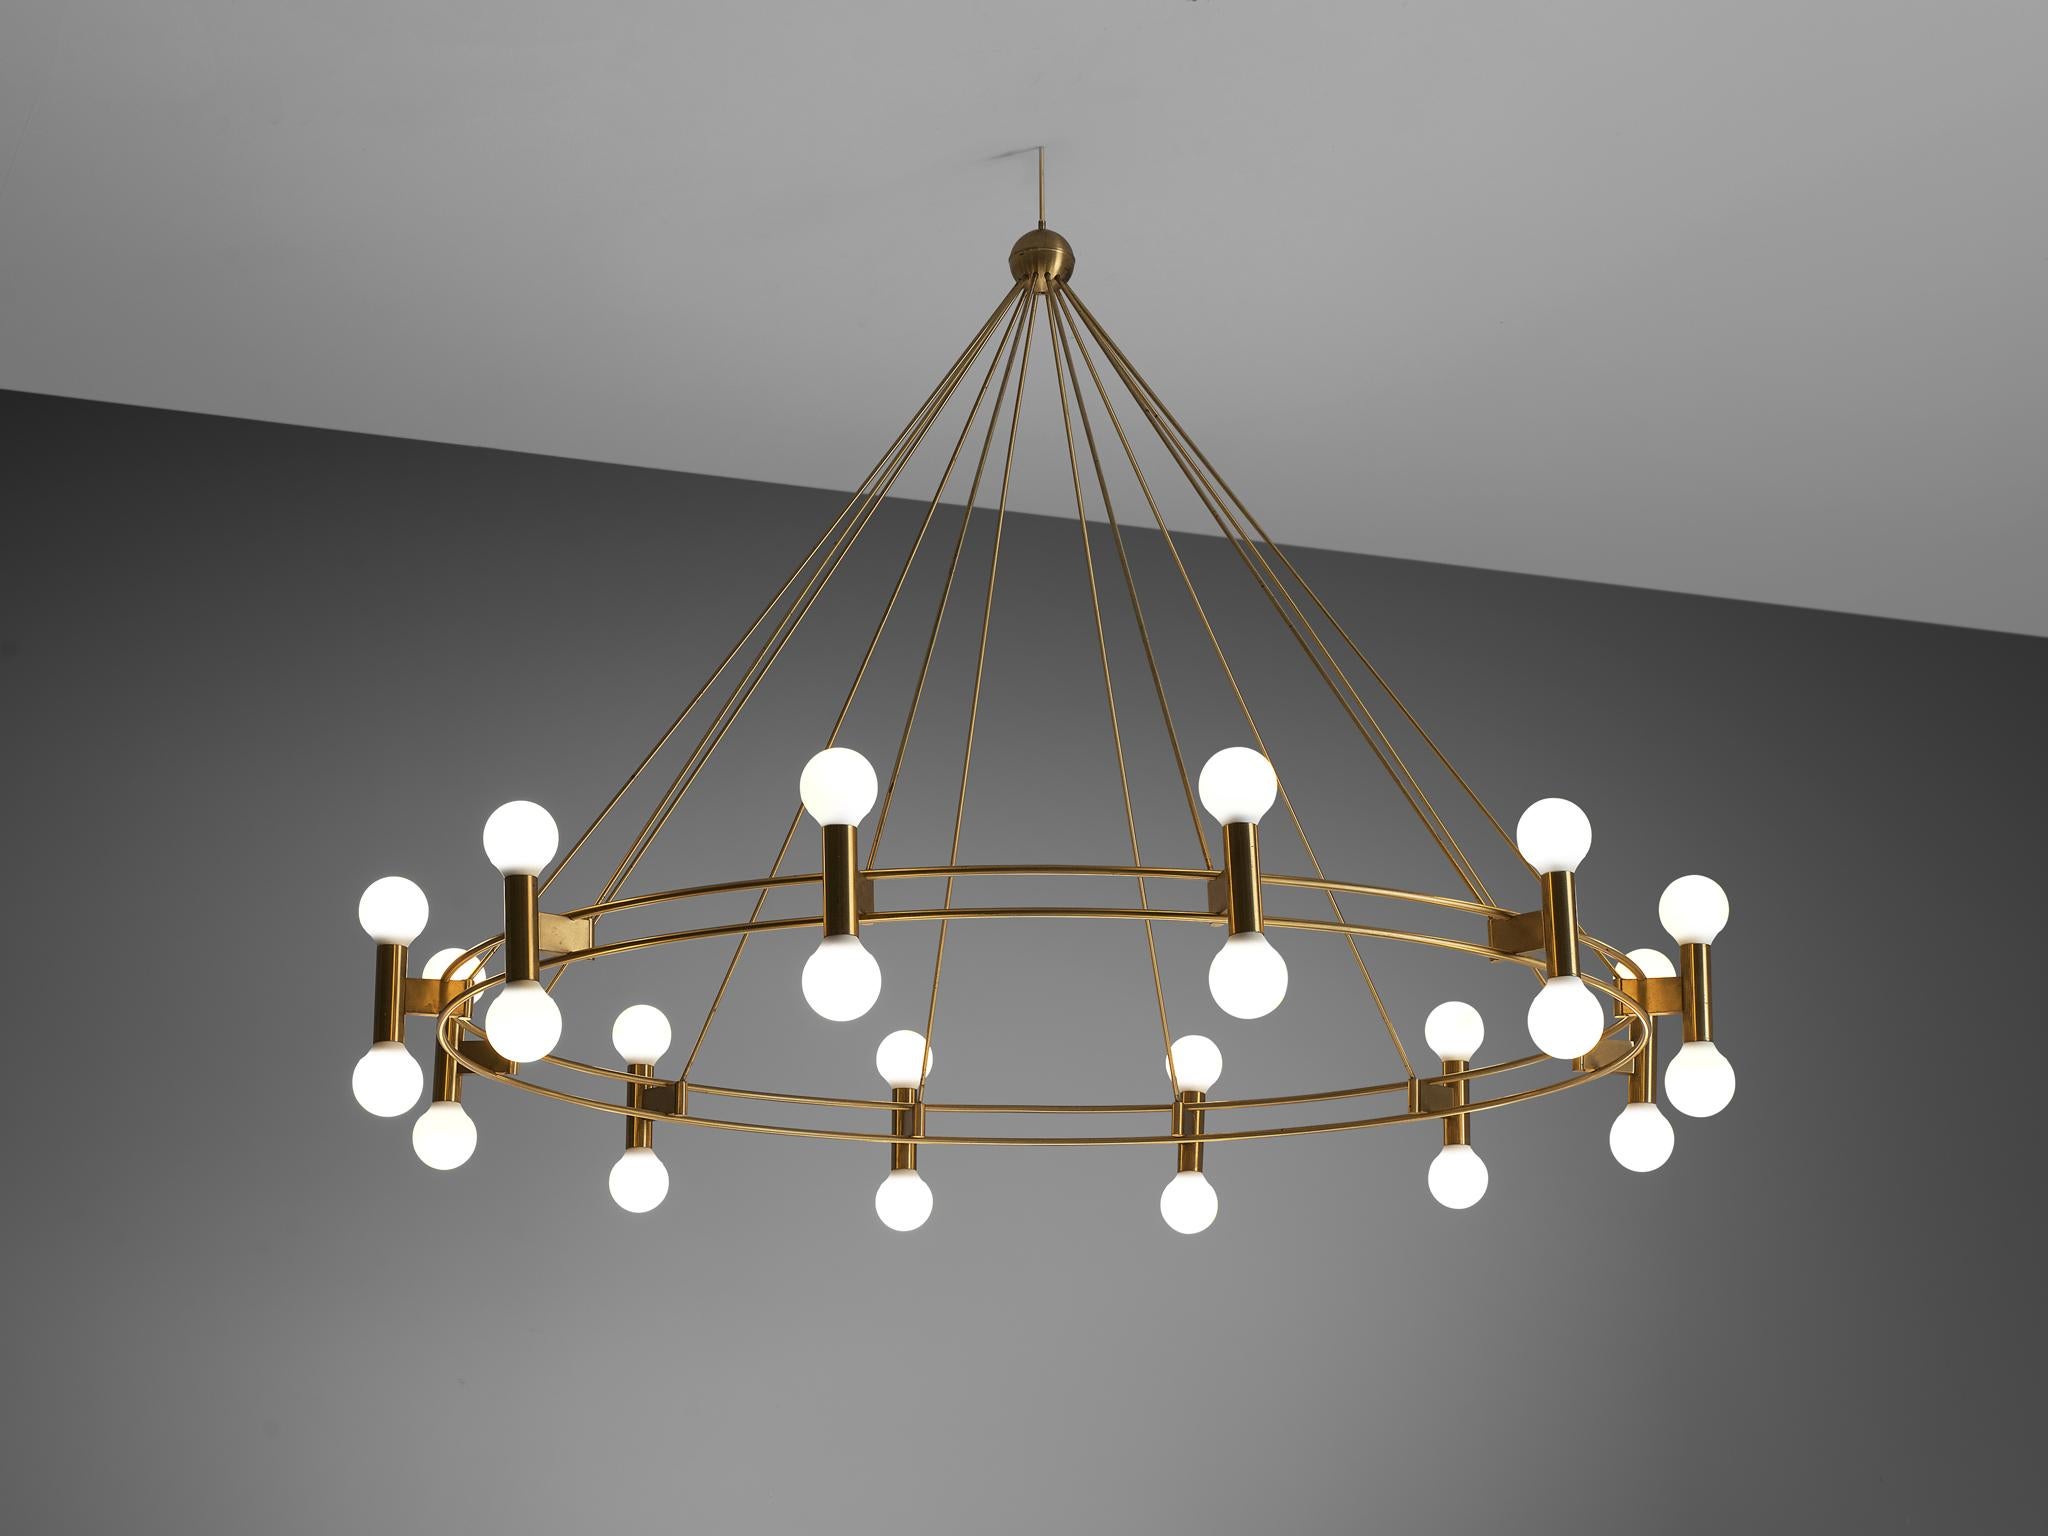 Chandelier with twelve ligh, brass, Scandinavia, 1960s.

This large chandelier is made in the 1960s in Scandinavia and shows typical Scandinavian Modern traits in its modest en minimalistic design. The chandelier consists of two large, thin circular